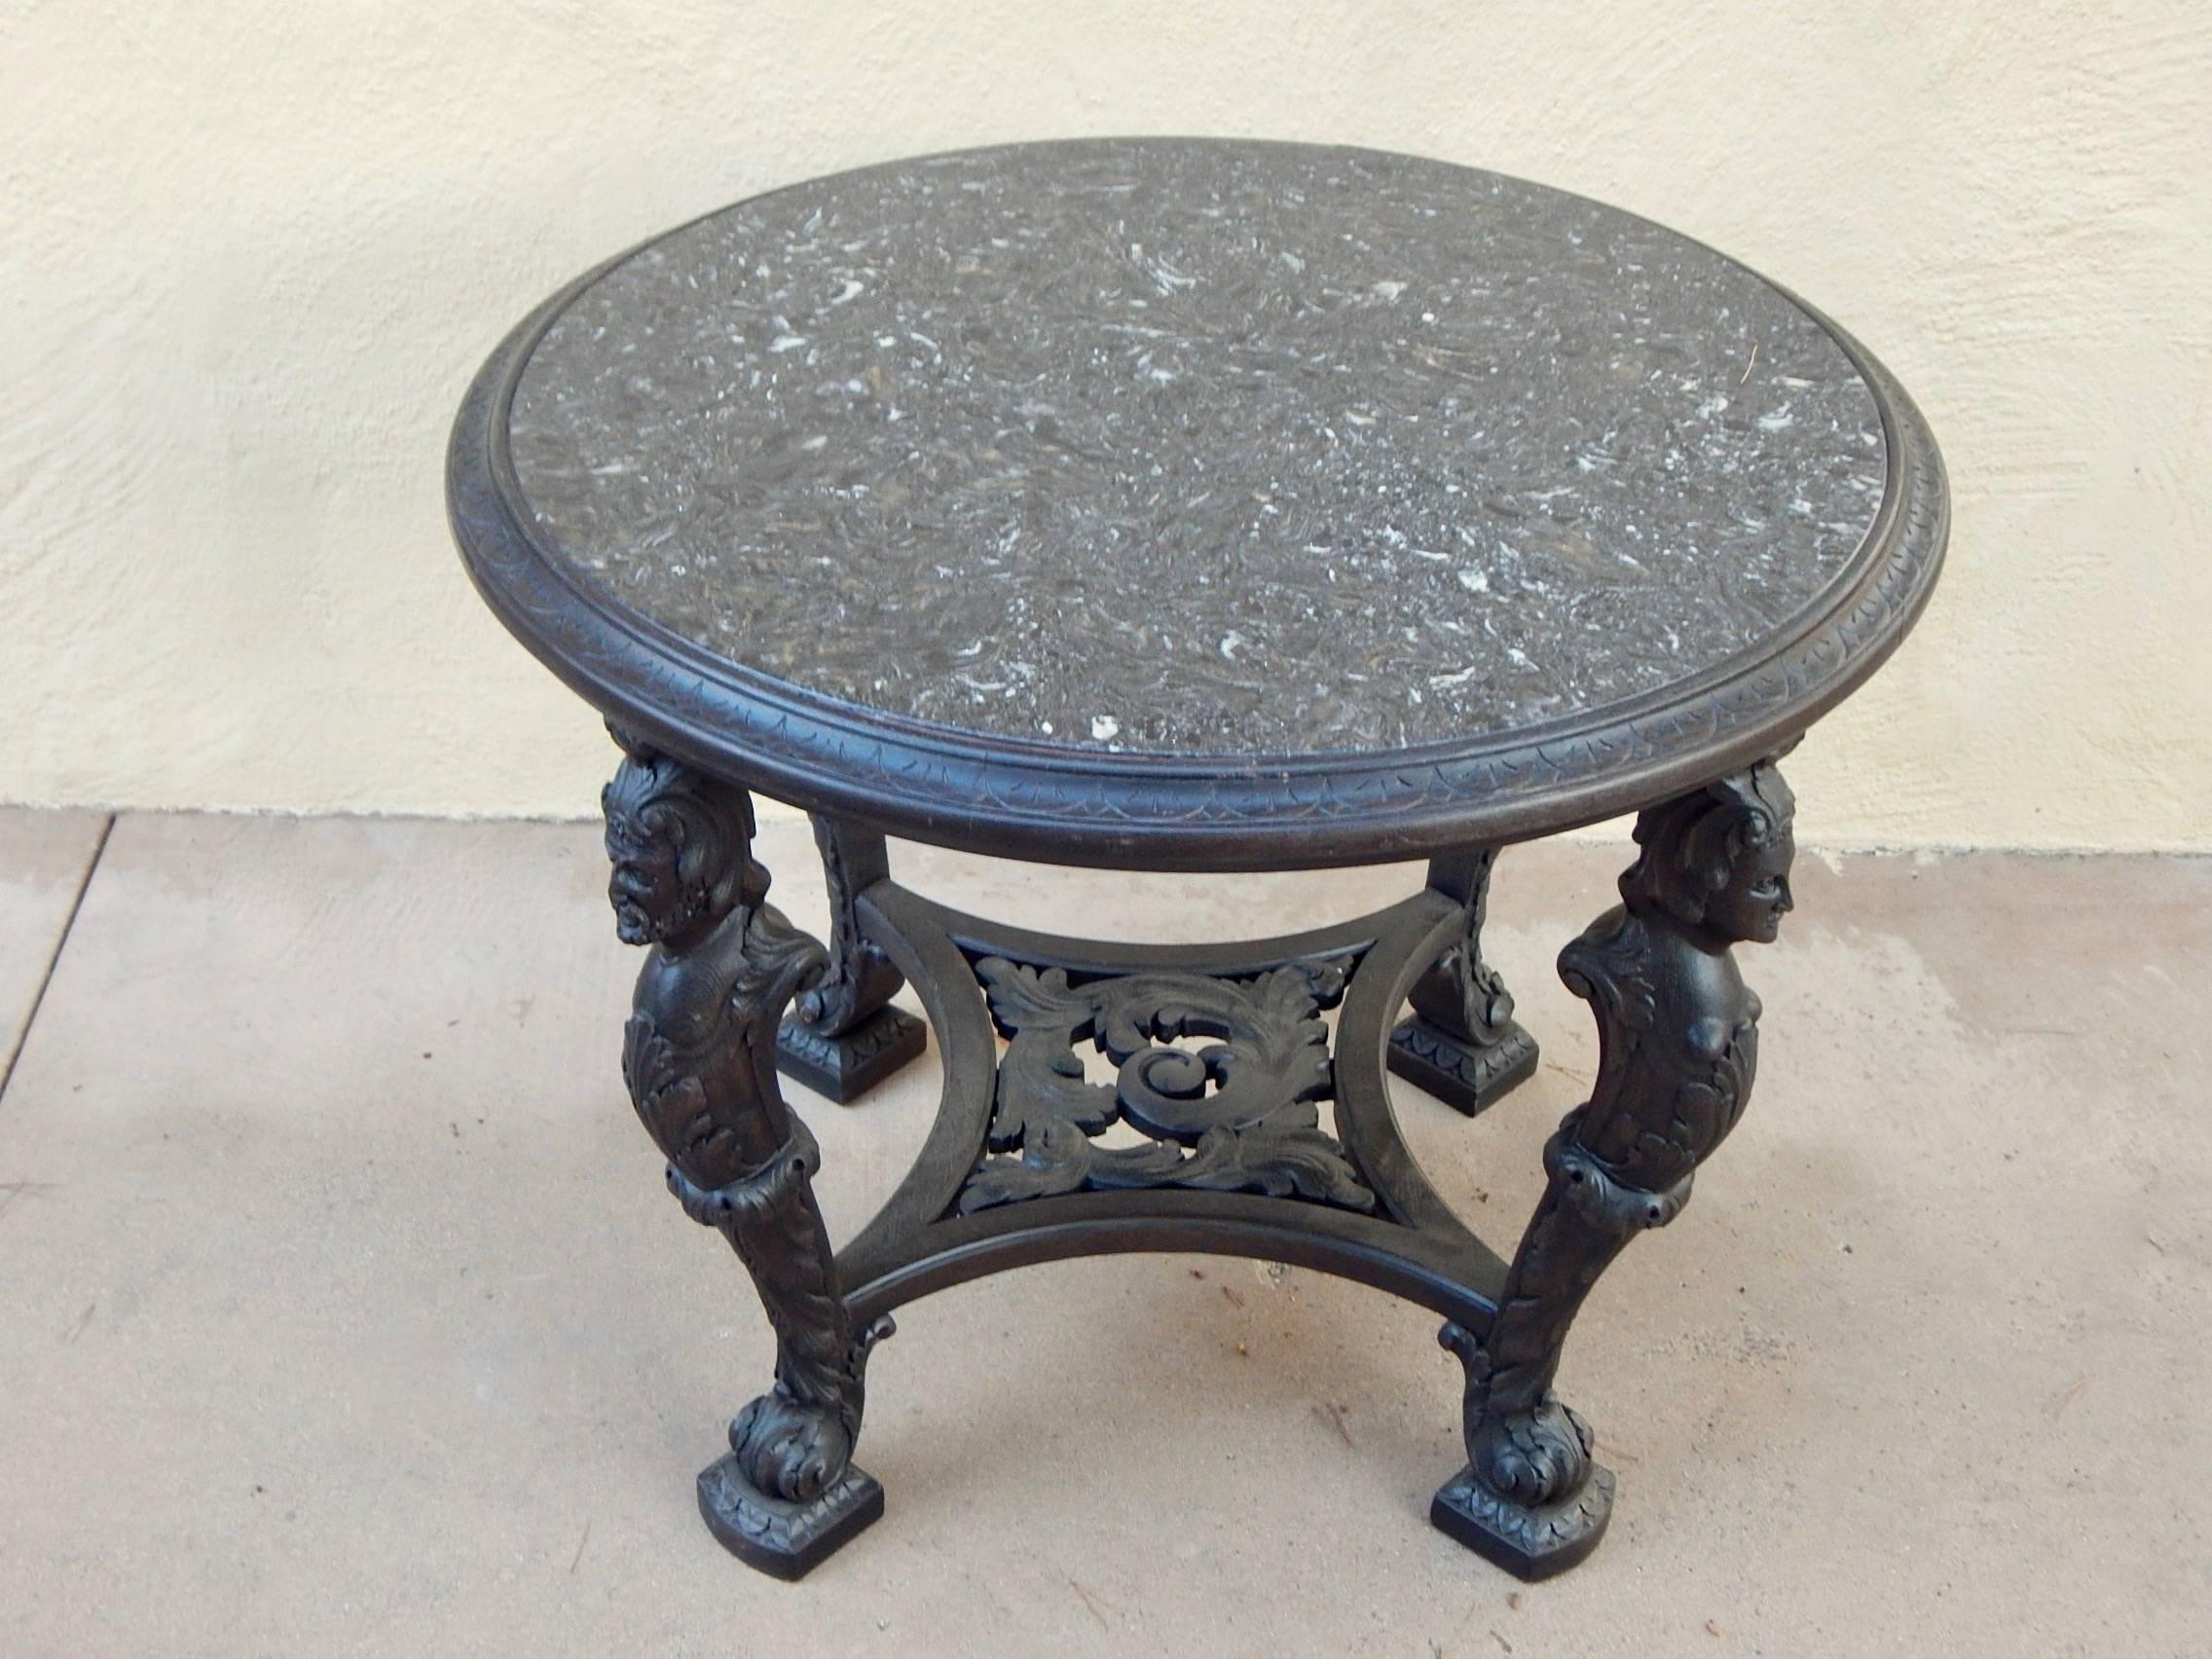 Swedish Gothic Revival Table with Figural Columns and Stone Top, circa 1920 For Sale 9